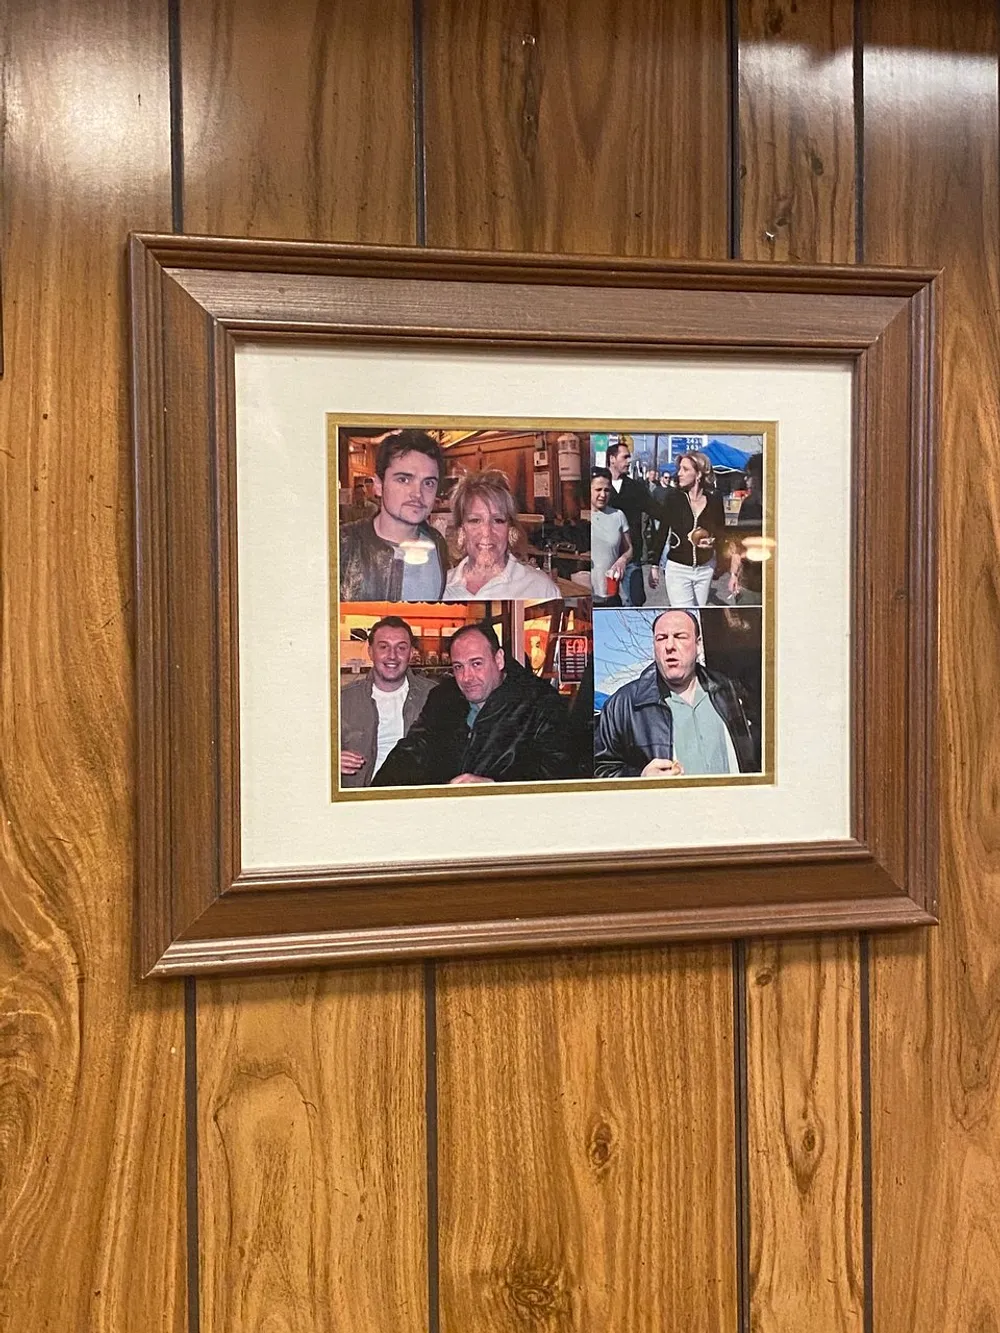 The image shows a wooden-framed collage featuring several smaller photographs of people hung on a wood-paneled wall